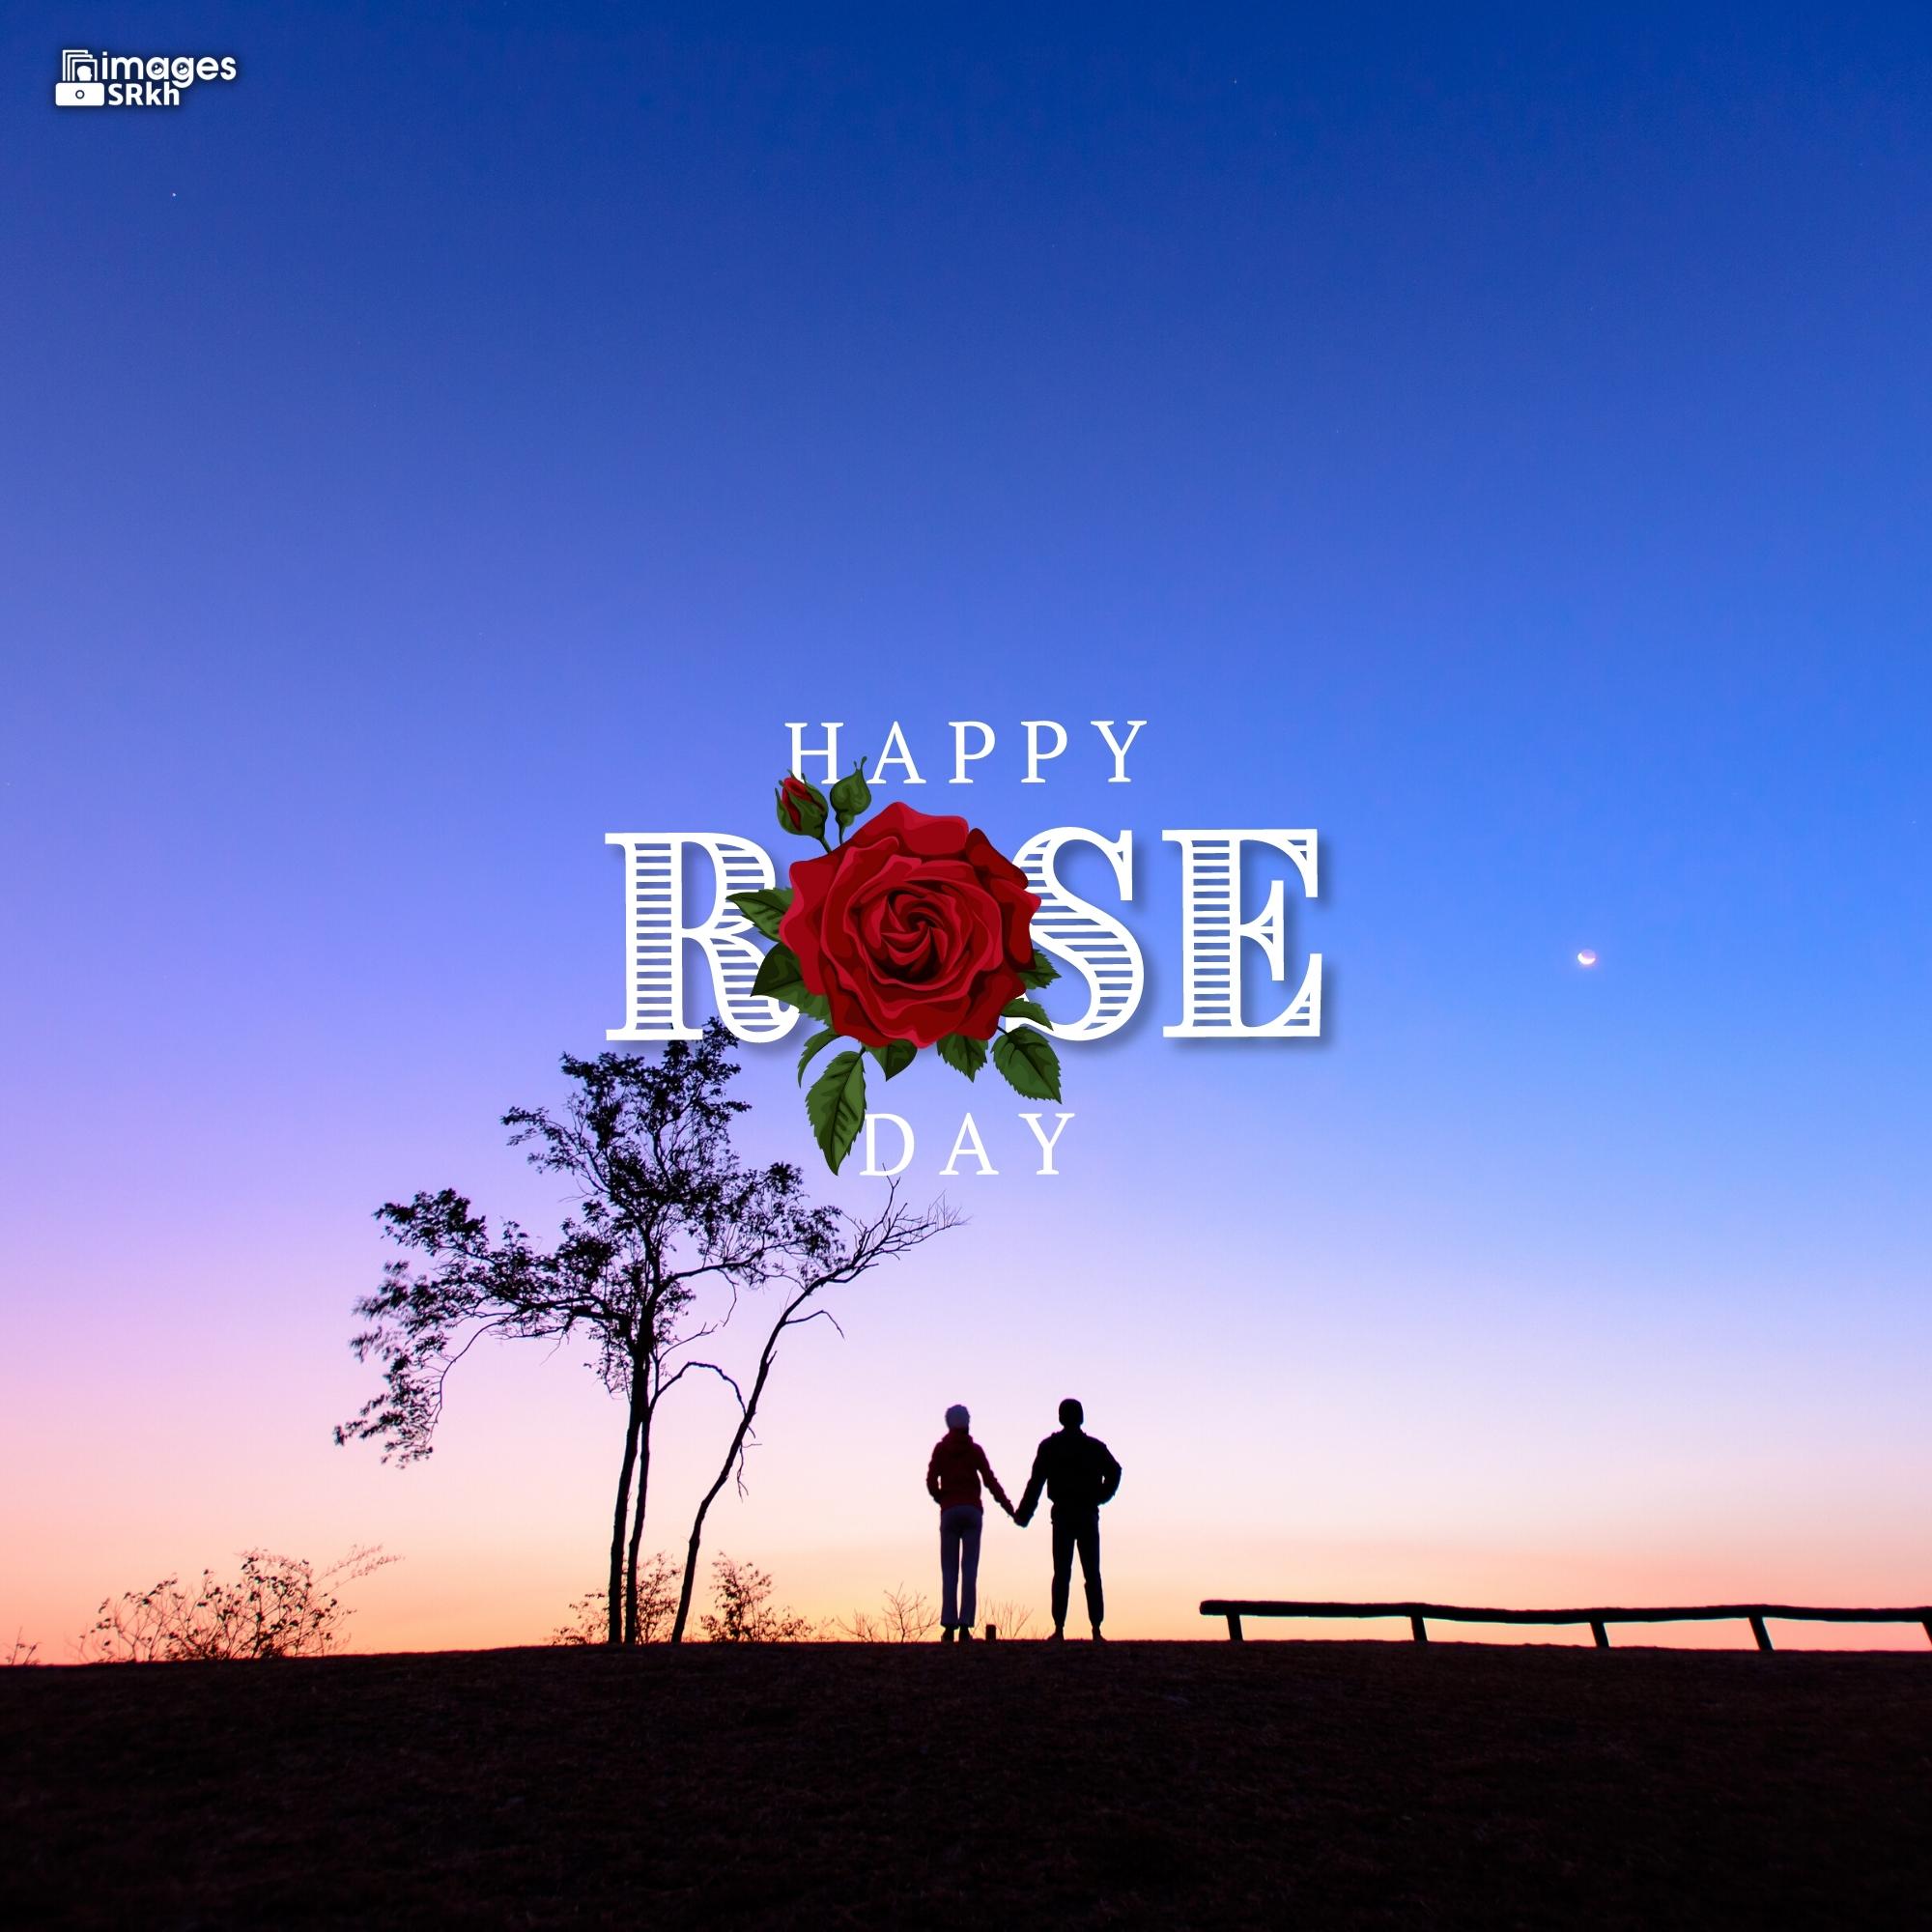 Romantic Rose Day Images Hd Download (25)